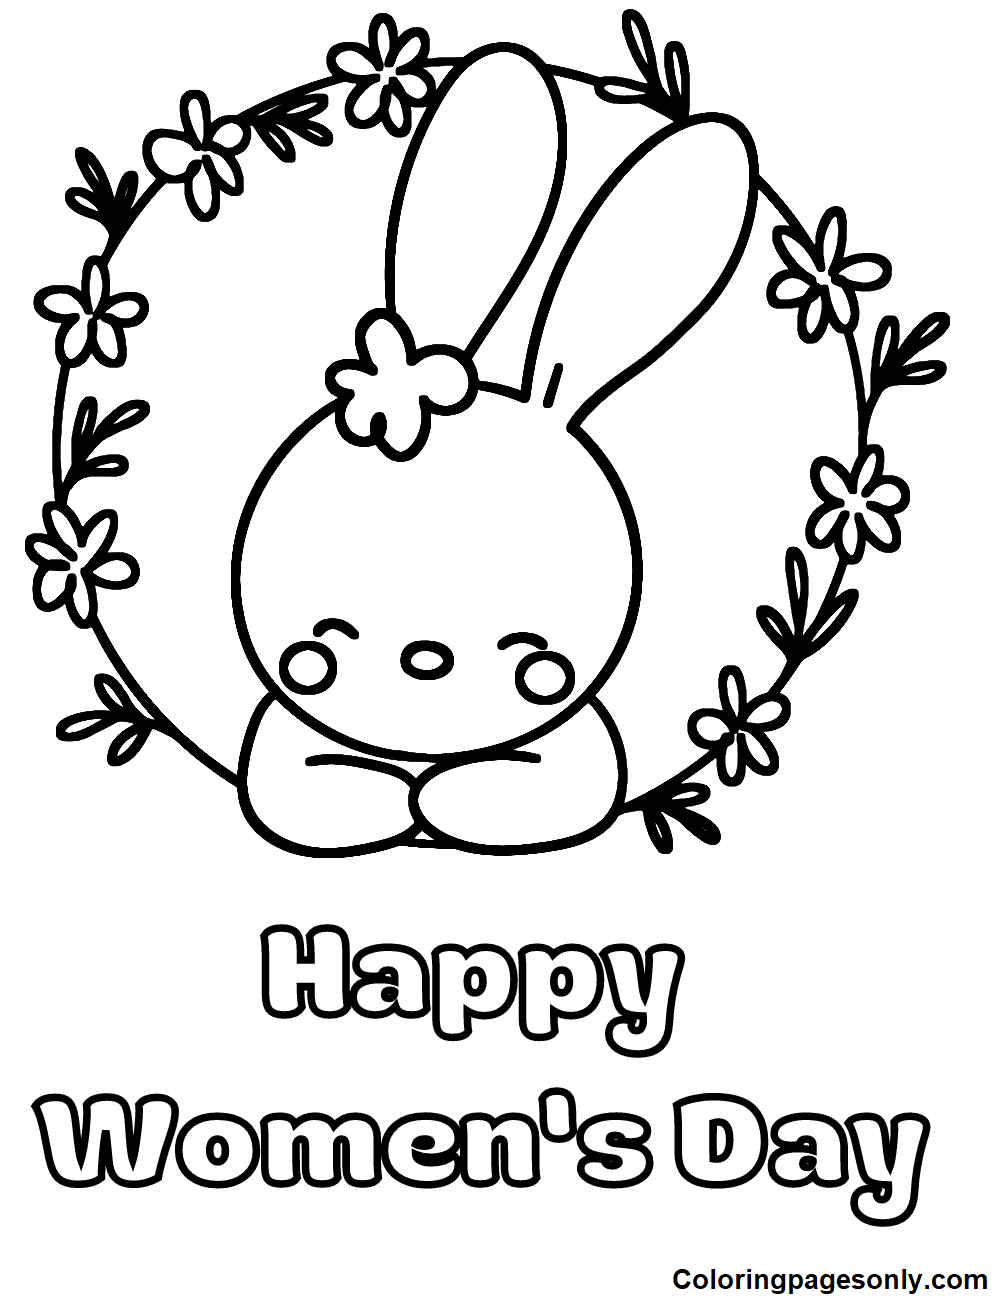 Free Happy Women’s Day Coloring Pages